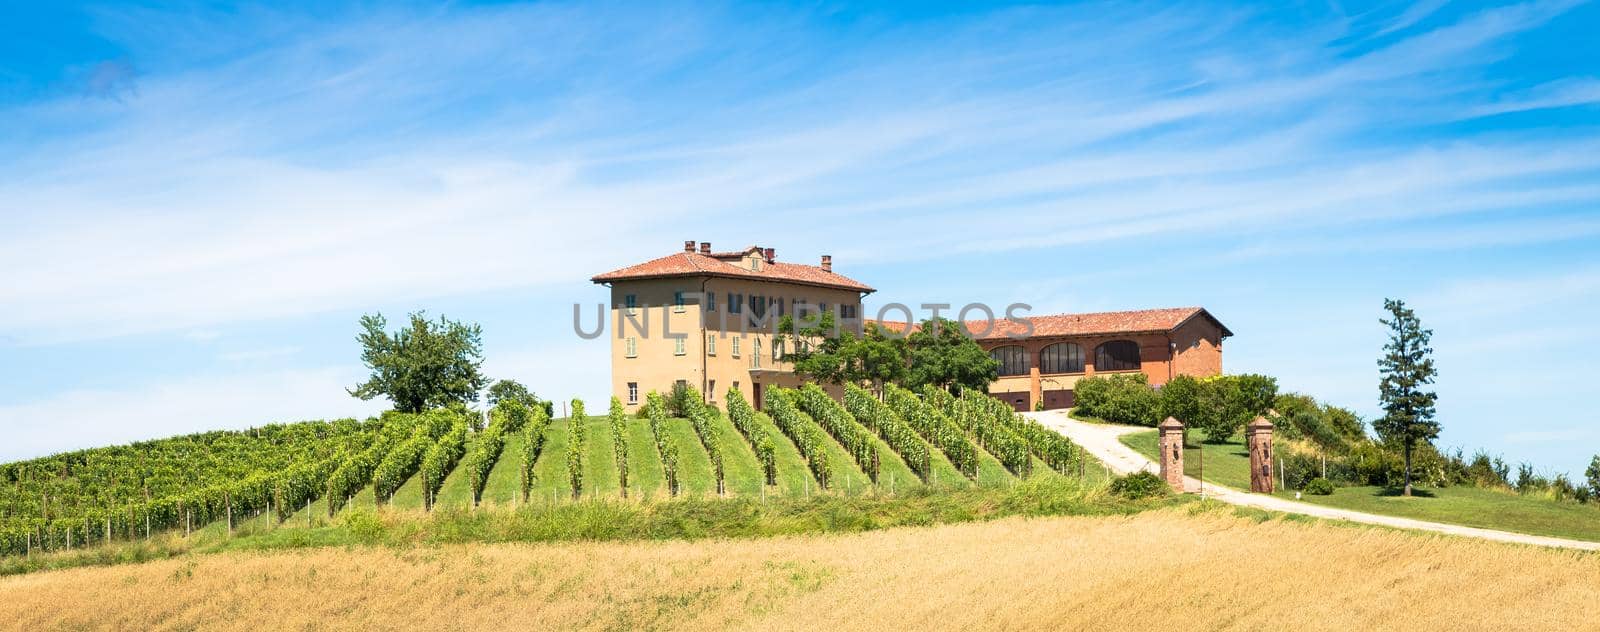 ASTI, ITALY - CIRCA AUGUST 2020: Piedmont hills in Italy, Monferrato area. Scenic countryside during summer season with vineyard field. Wonderful blue sky in background.